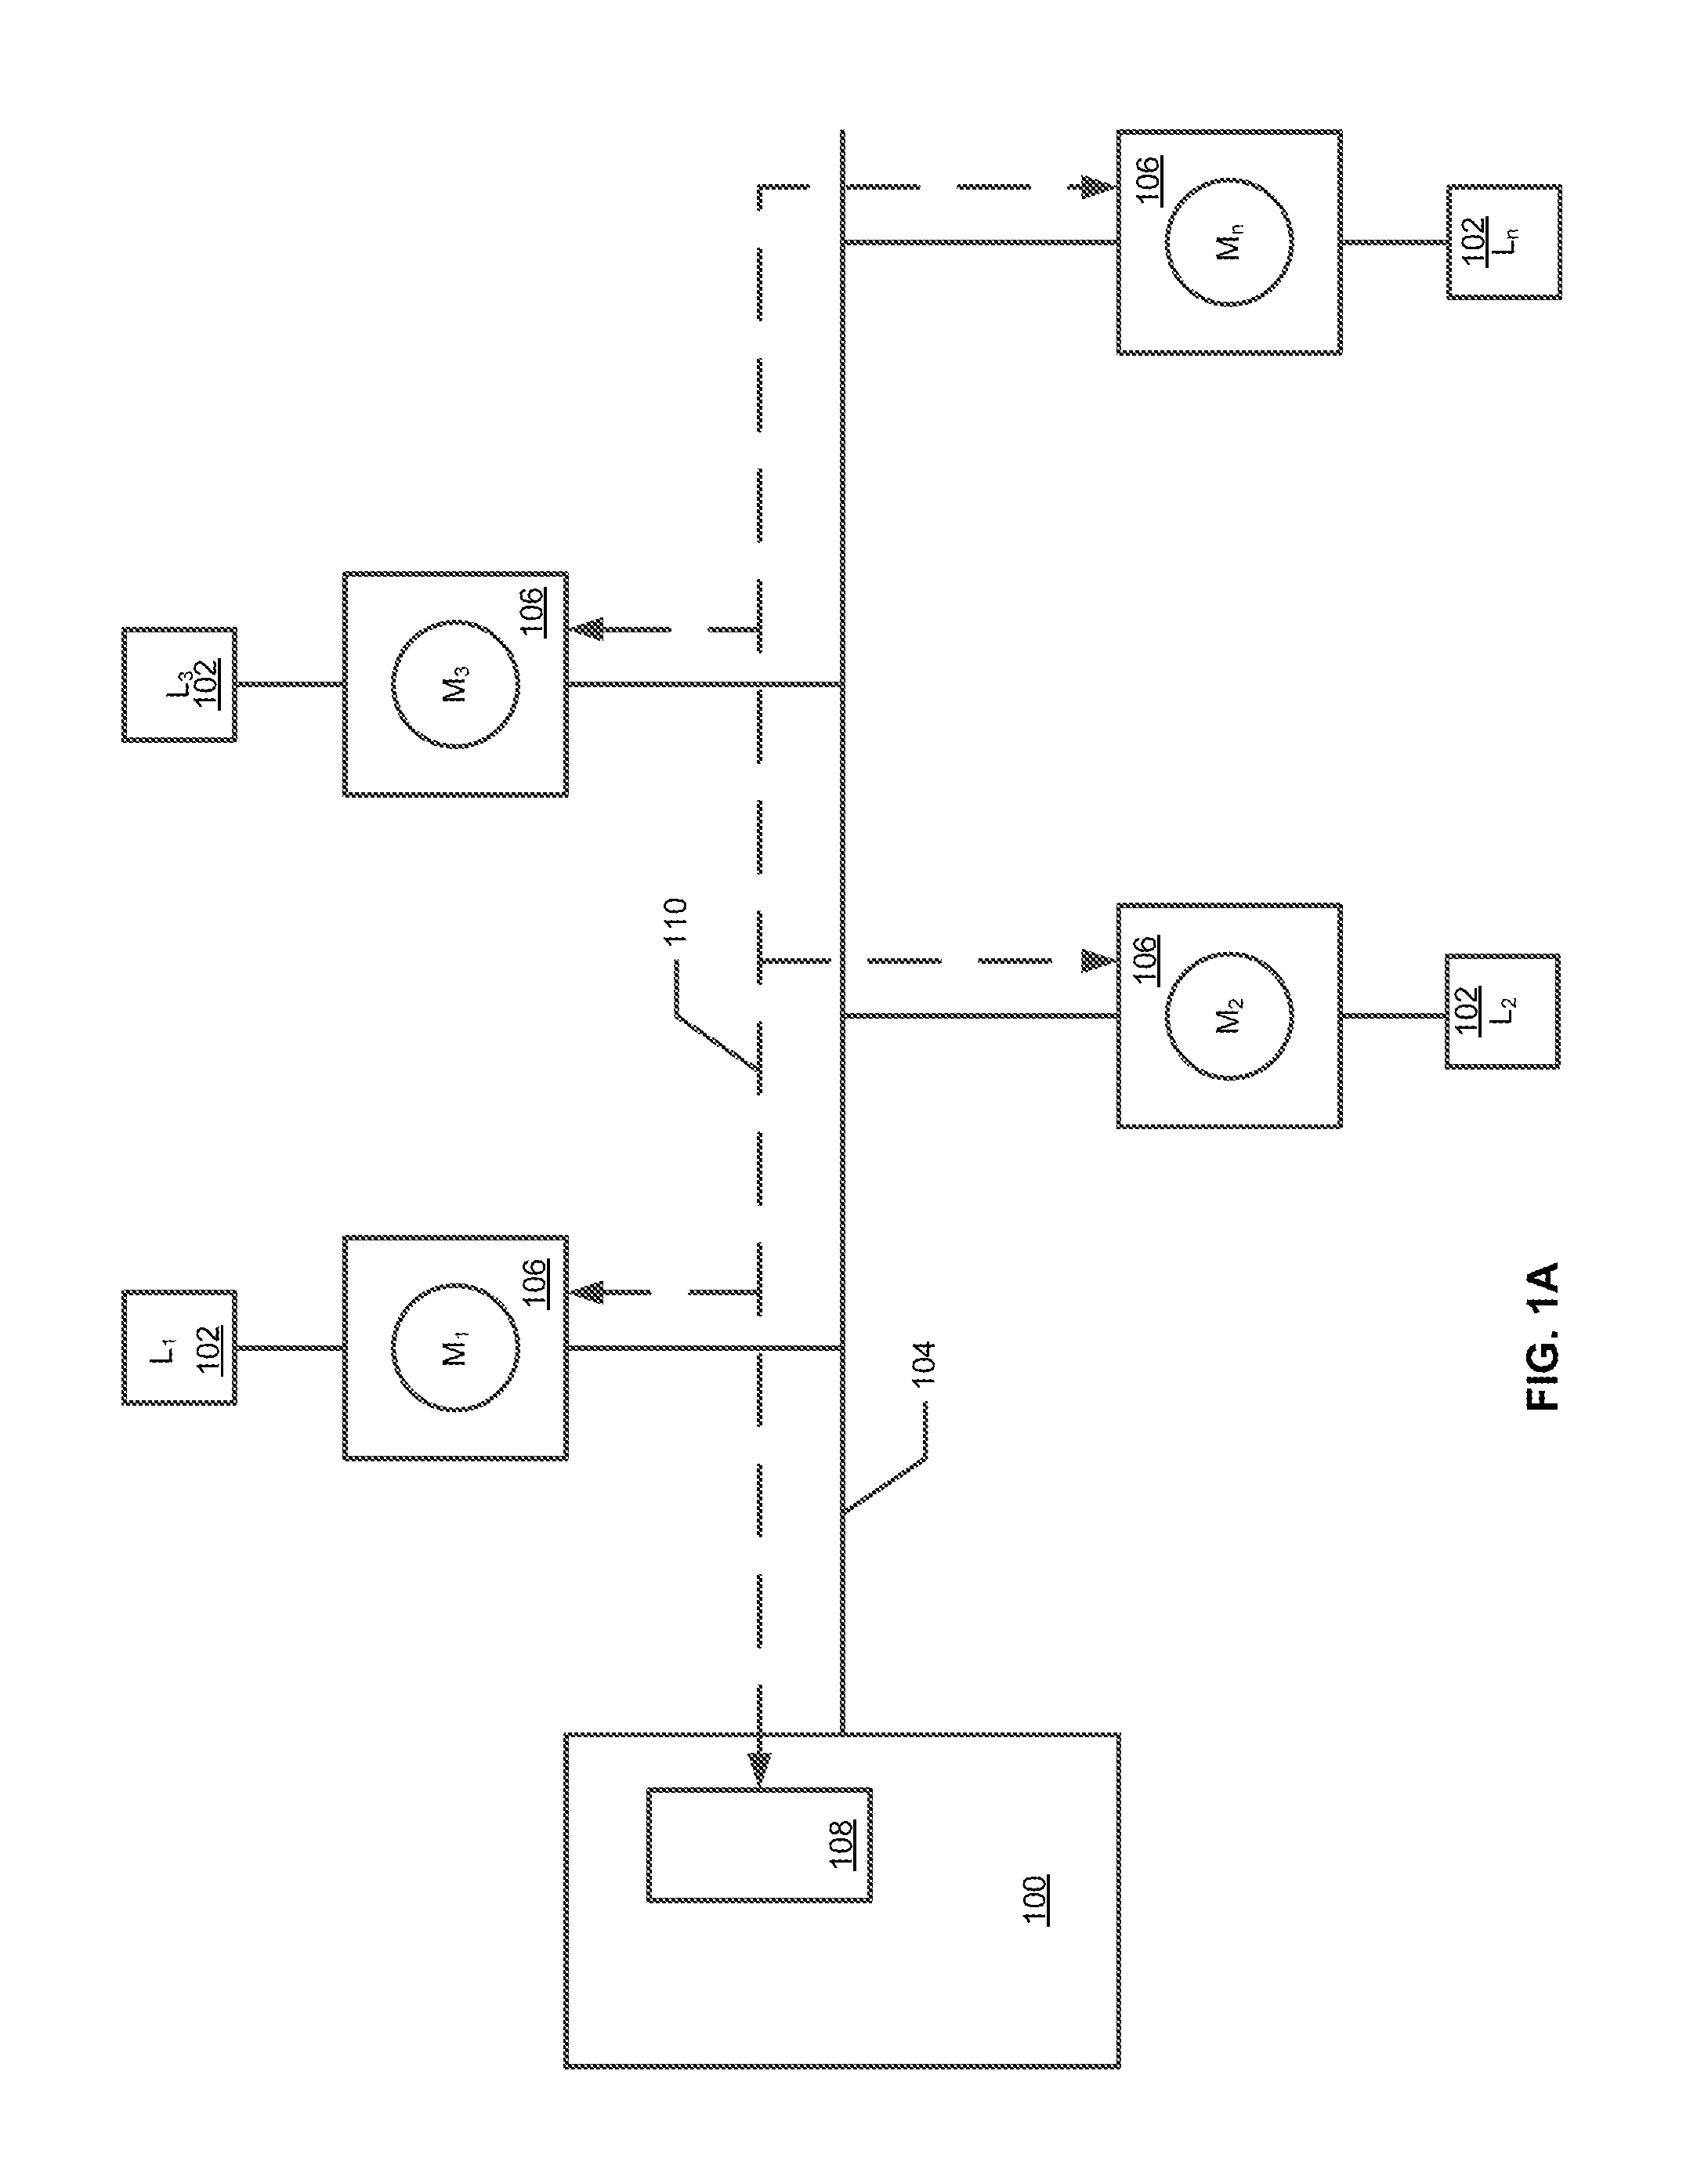 Method, system and device of phase identification using a smart meter